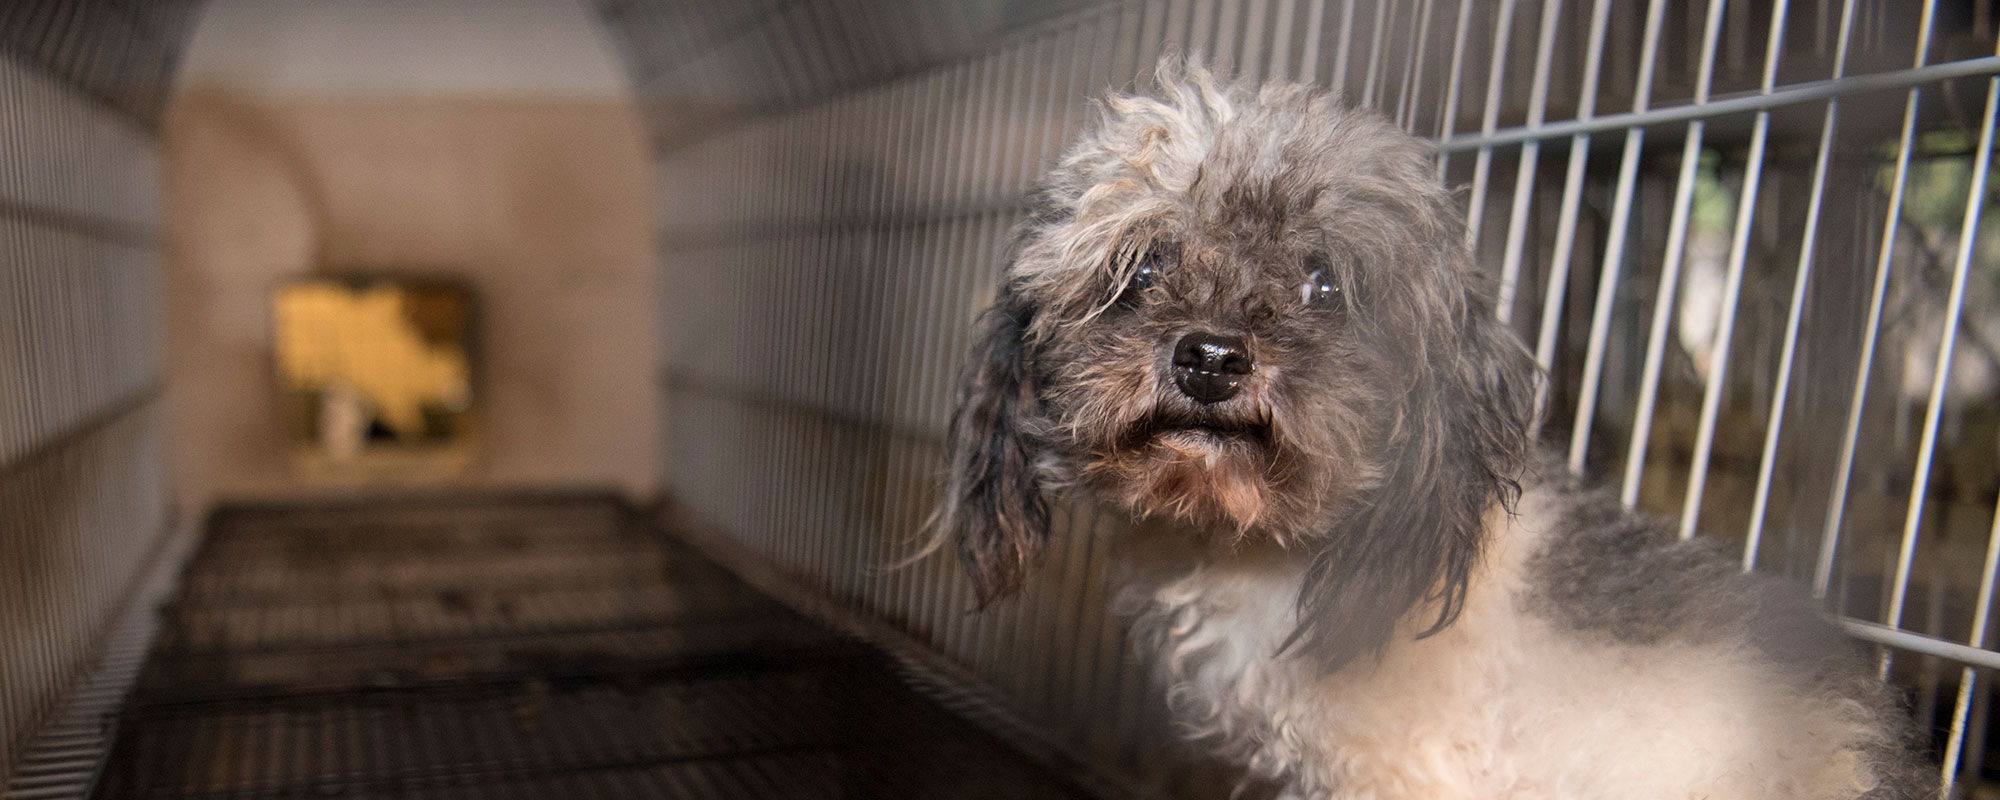 A scared looking dog in a long cage